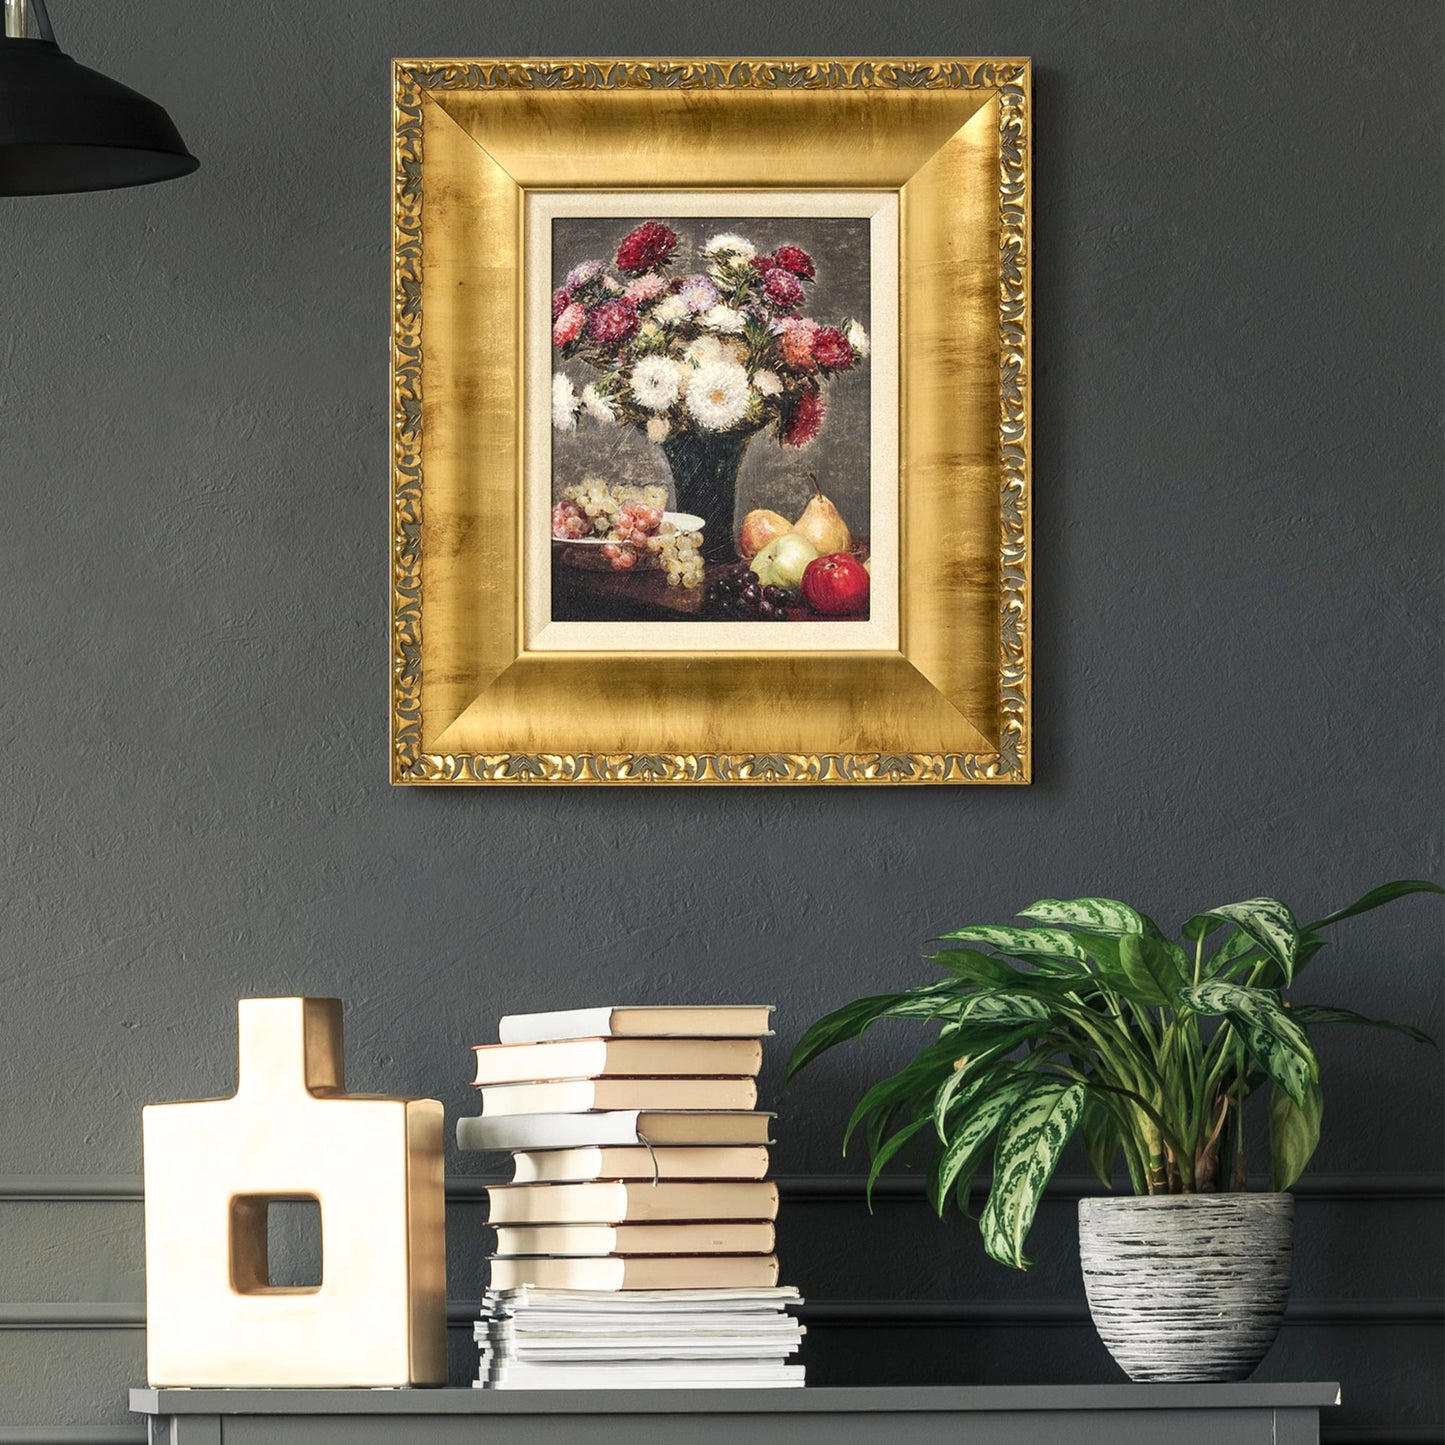 Ornate Framed Asters and Fruit Canvas Print by Henri Fantin-Latour 14.75" x 16.75"